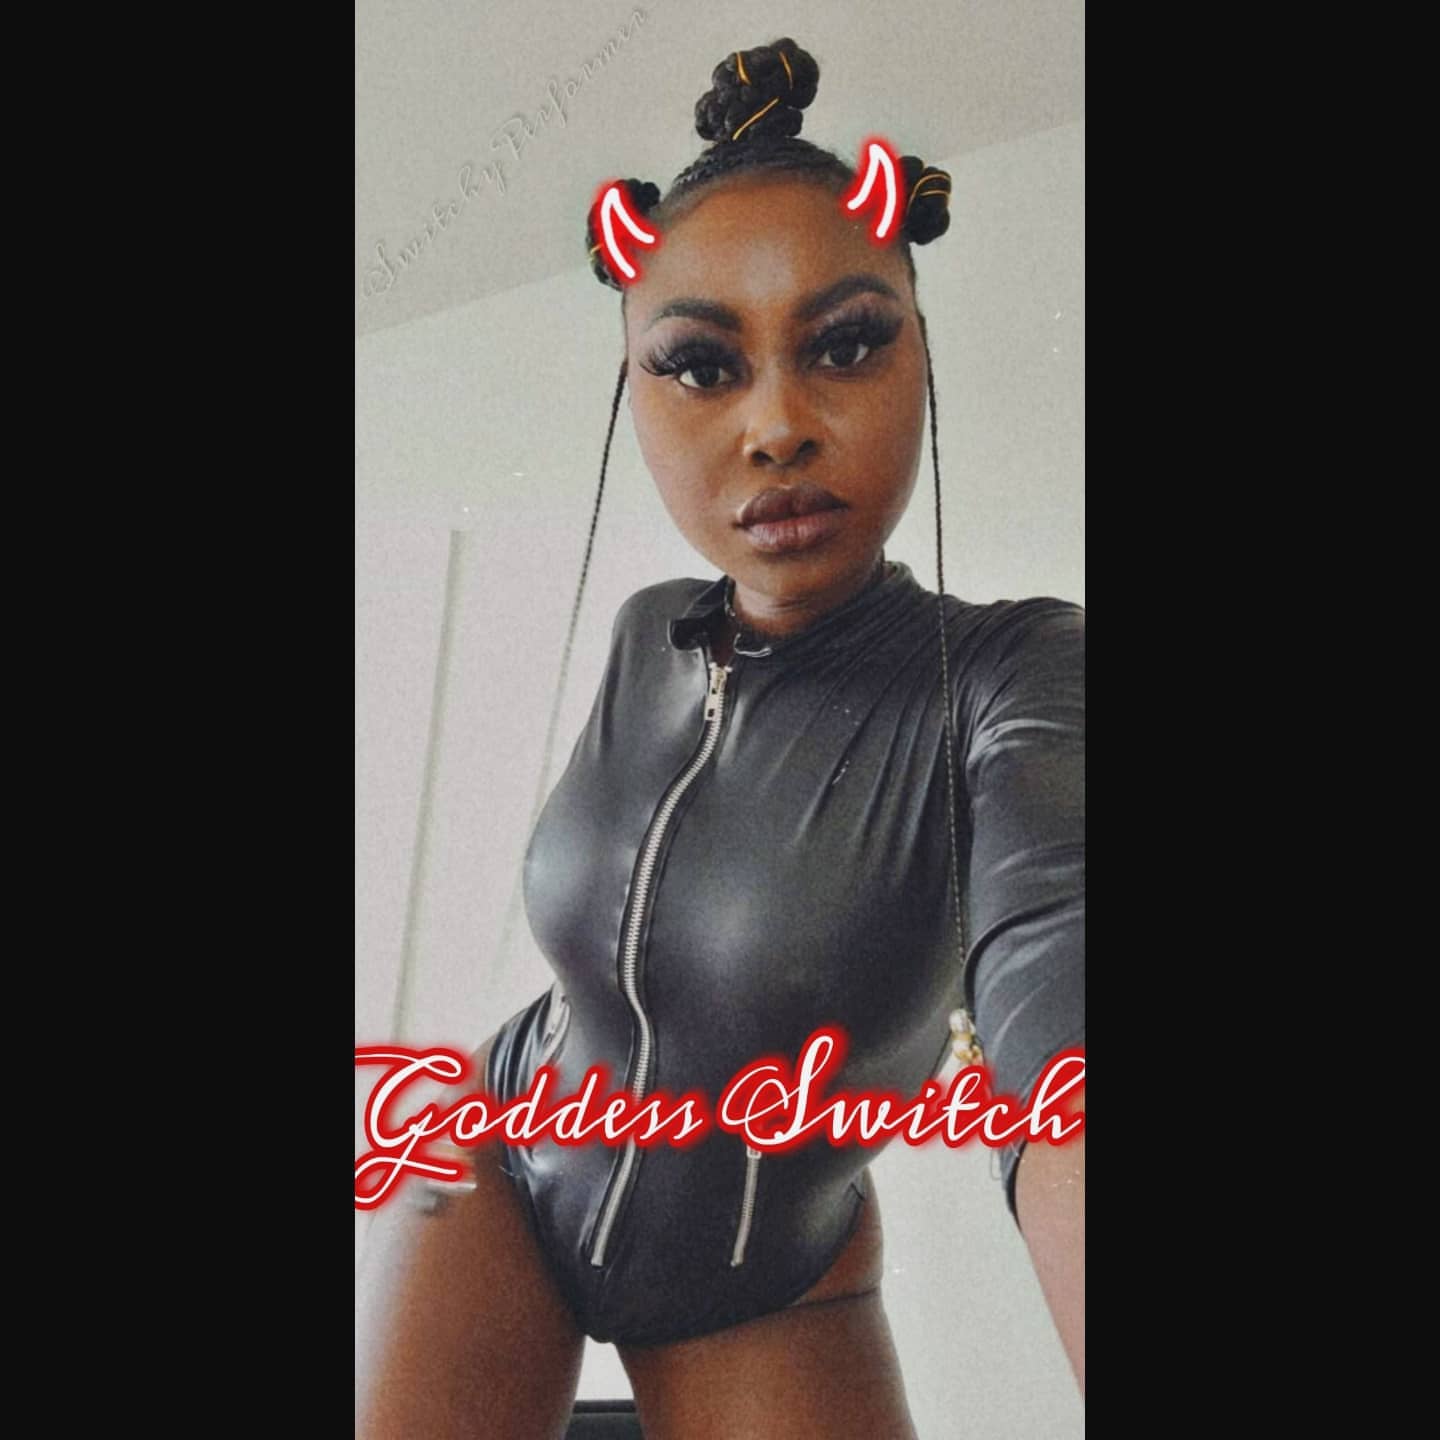 OBEY 😈
.
.
I'll be open for bookings all 2022!
Seeking servants, submissives, and sissys to slave for me & $end! 🤑
.
#SwitchyPerformer #dominatrix #dømme #dominantsubmissive #ebonyfemdom #ebonyfindom #goddess #ebonydomme #blackbdsm #bdsmcommunity #dømme #blackbdsmcommunity #bdsmlife #femmedomme #blackdomme #sissy #sissyboy #sissyslave #servant #bdsmslave #bdsmslavetraining #onlyfriends